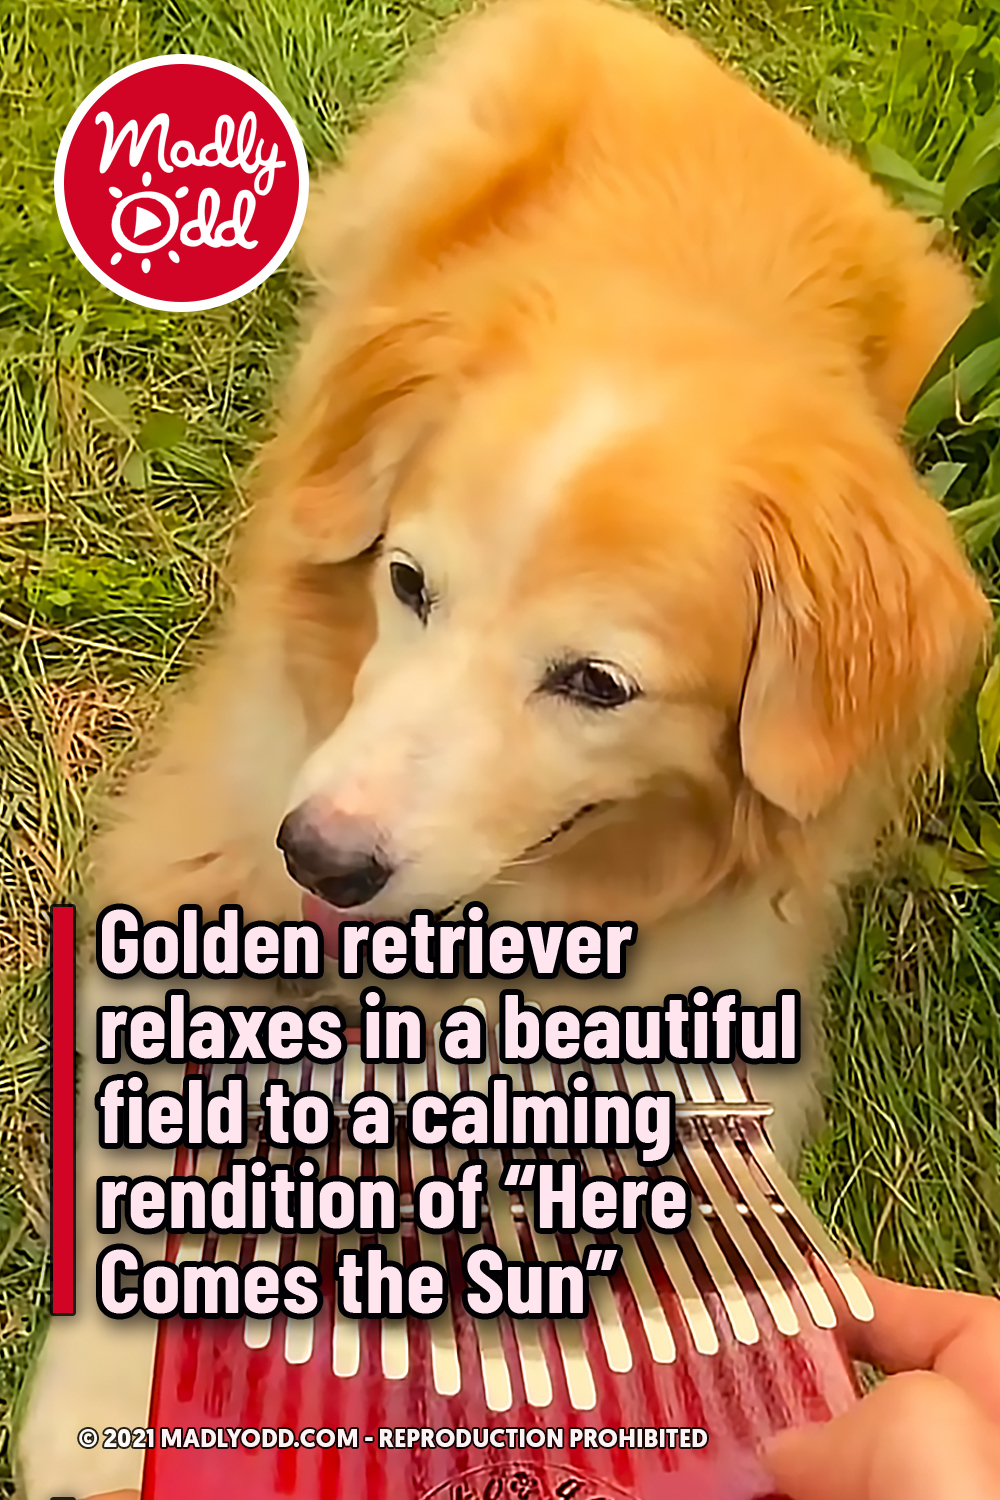 Golden retriever relaxes in a beautiful field to a calming rendition of “Here Comes the Sun”